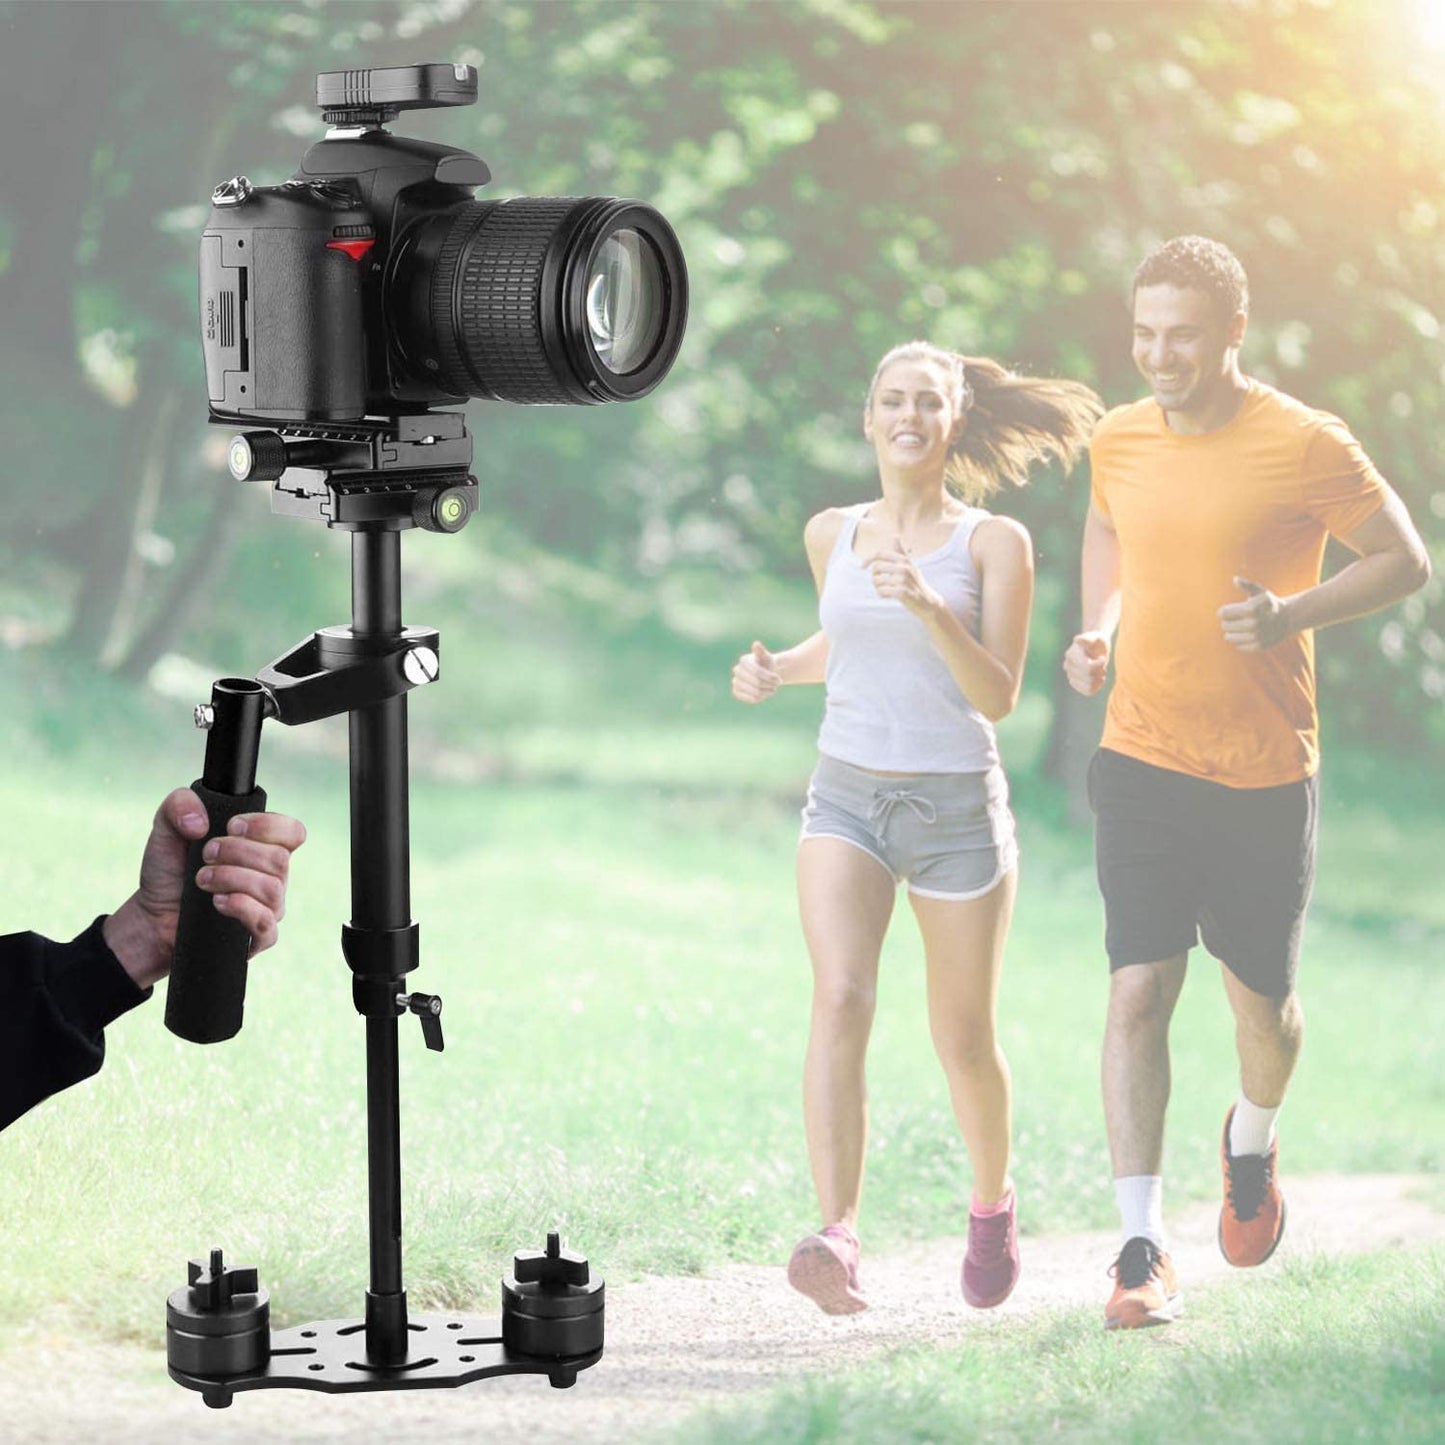 SUTEFOTO S40 Handheld Stabilizer Steadicam Pro Version for Camera Video DV DSLR Nikon Canon, Sony, Panasonic with Quick Release Plate (Black) - (For 1 piece(s))